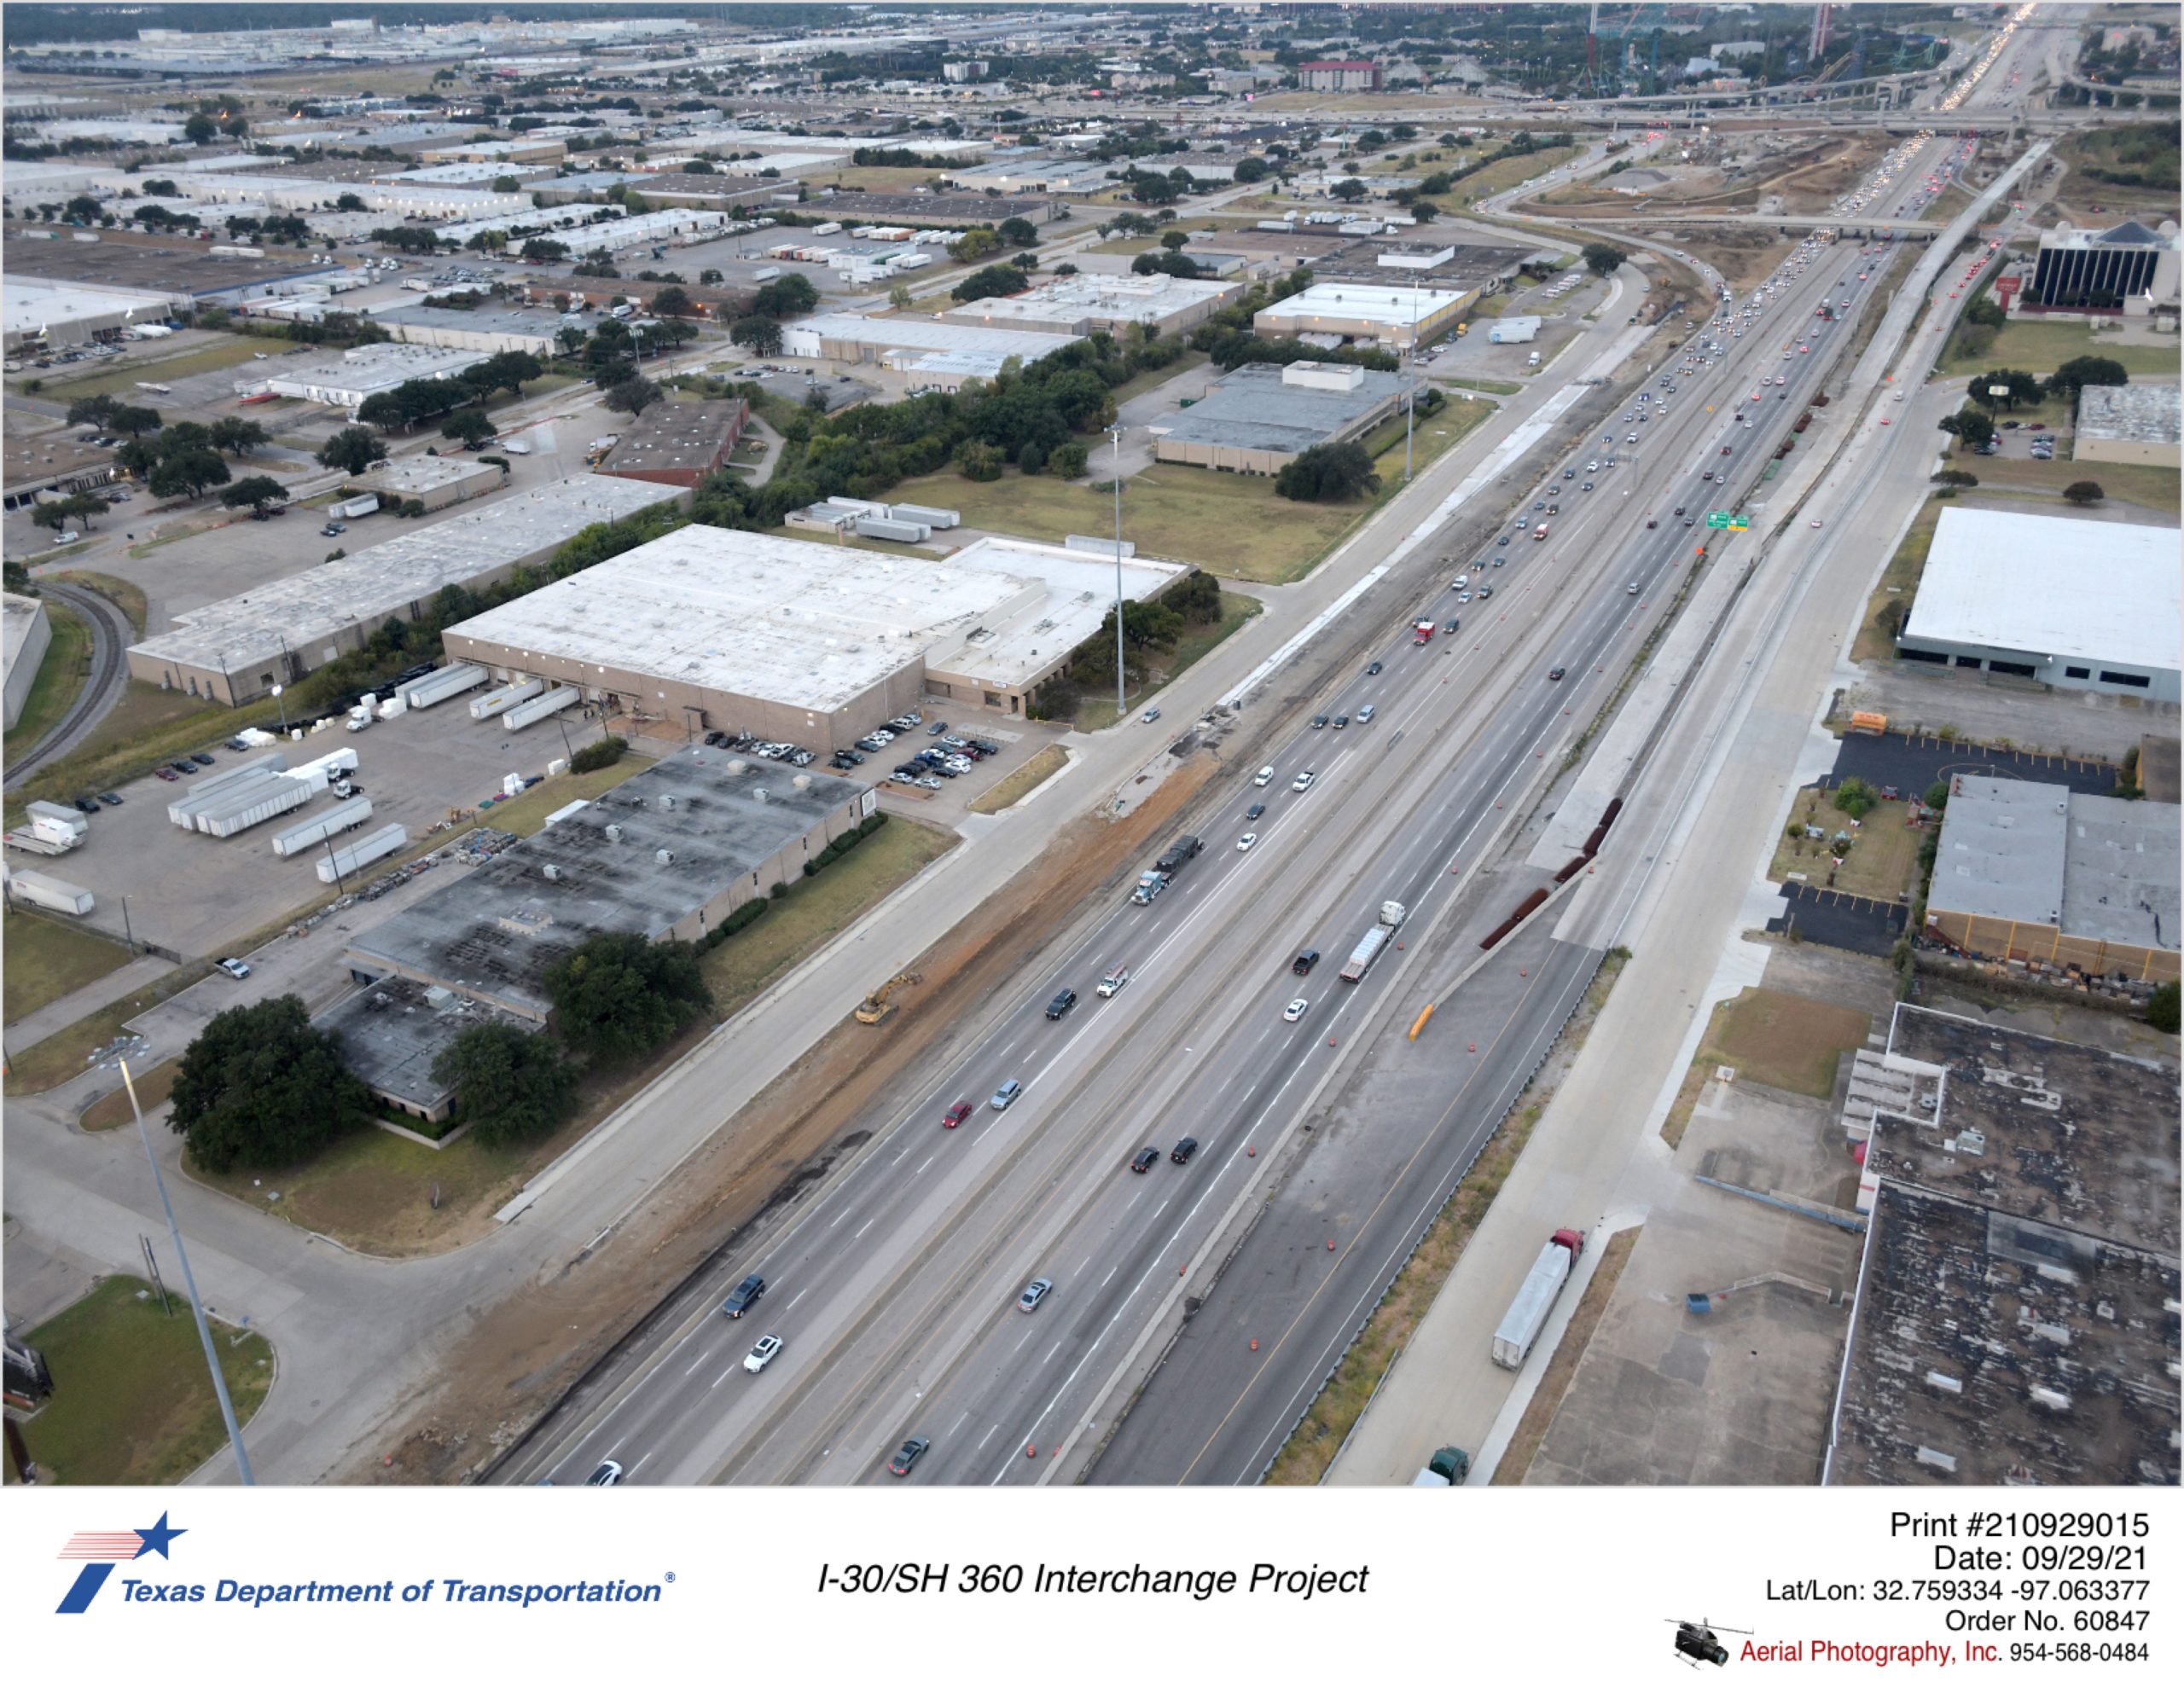 I-30 looking west to SH 360 interchange in far background.